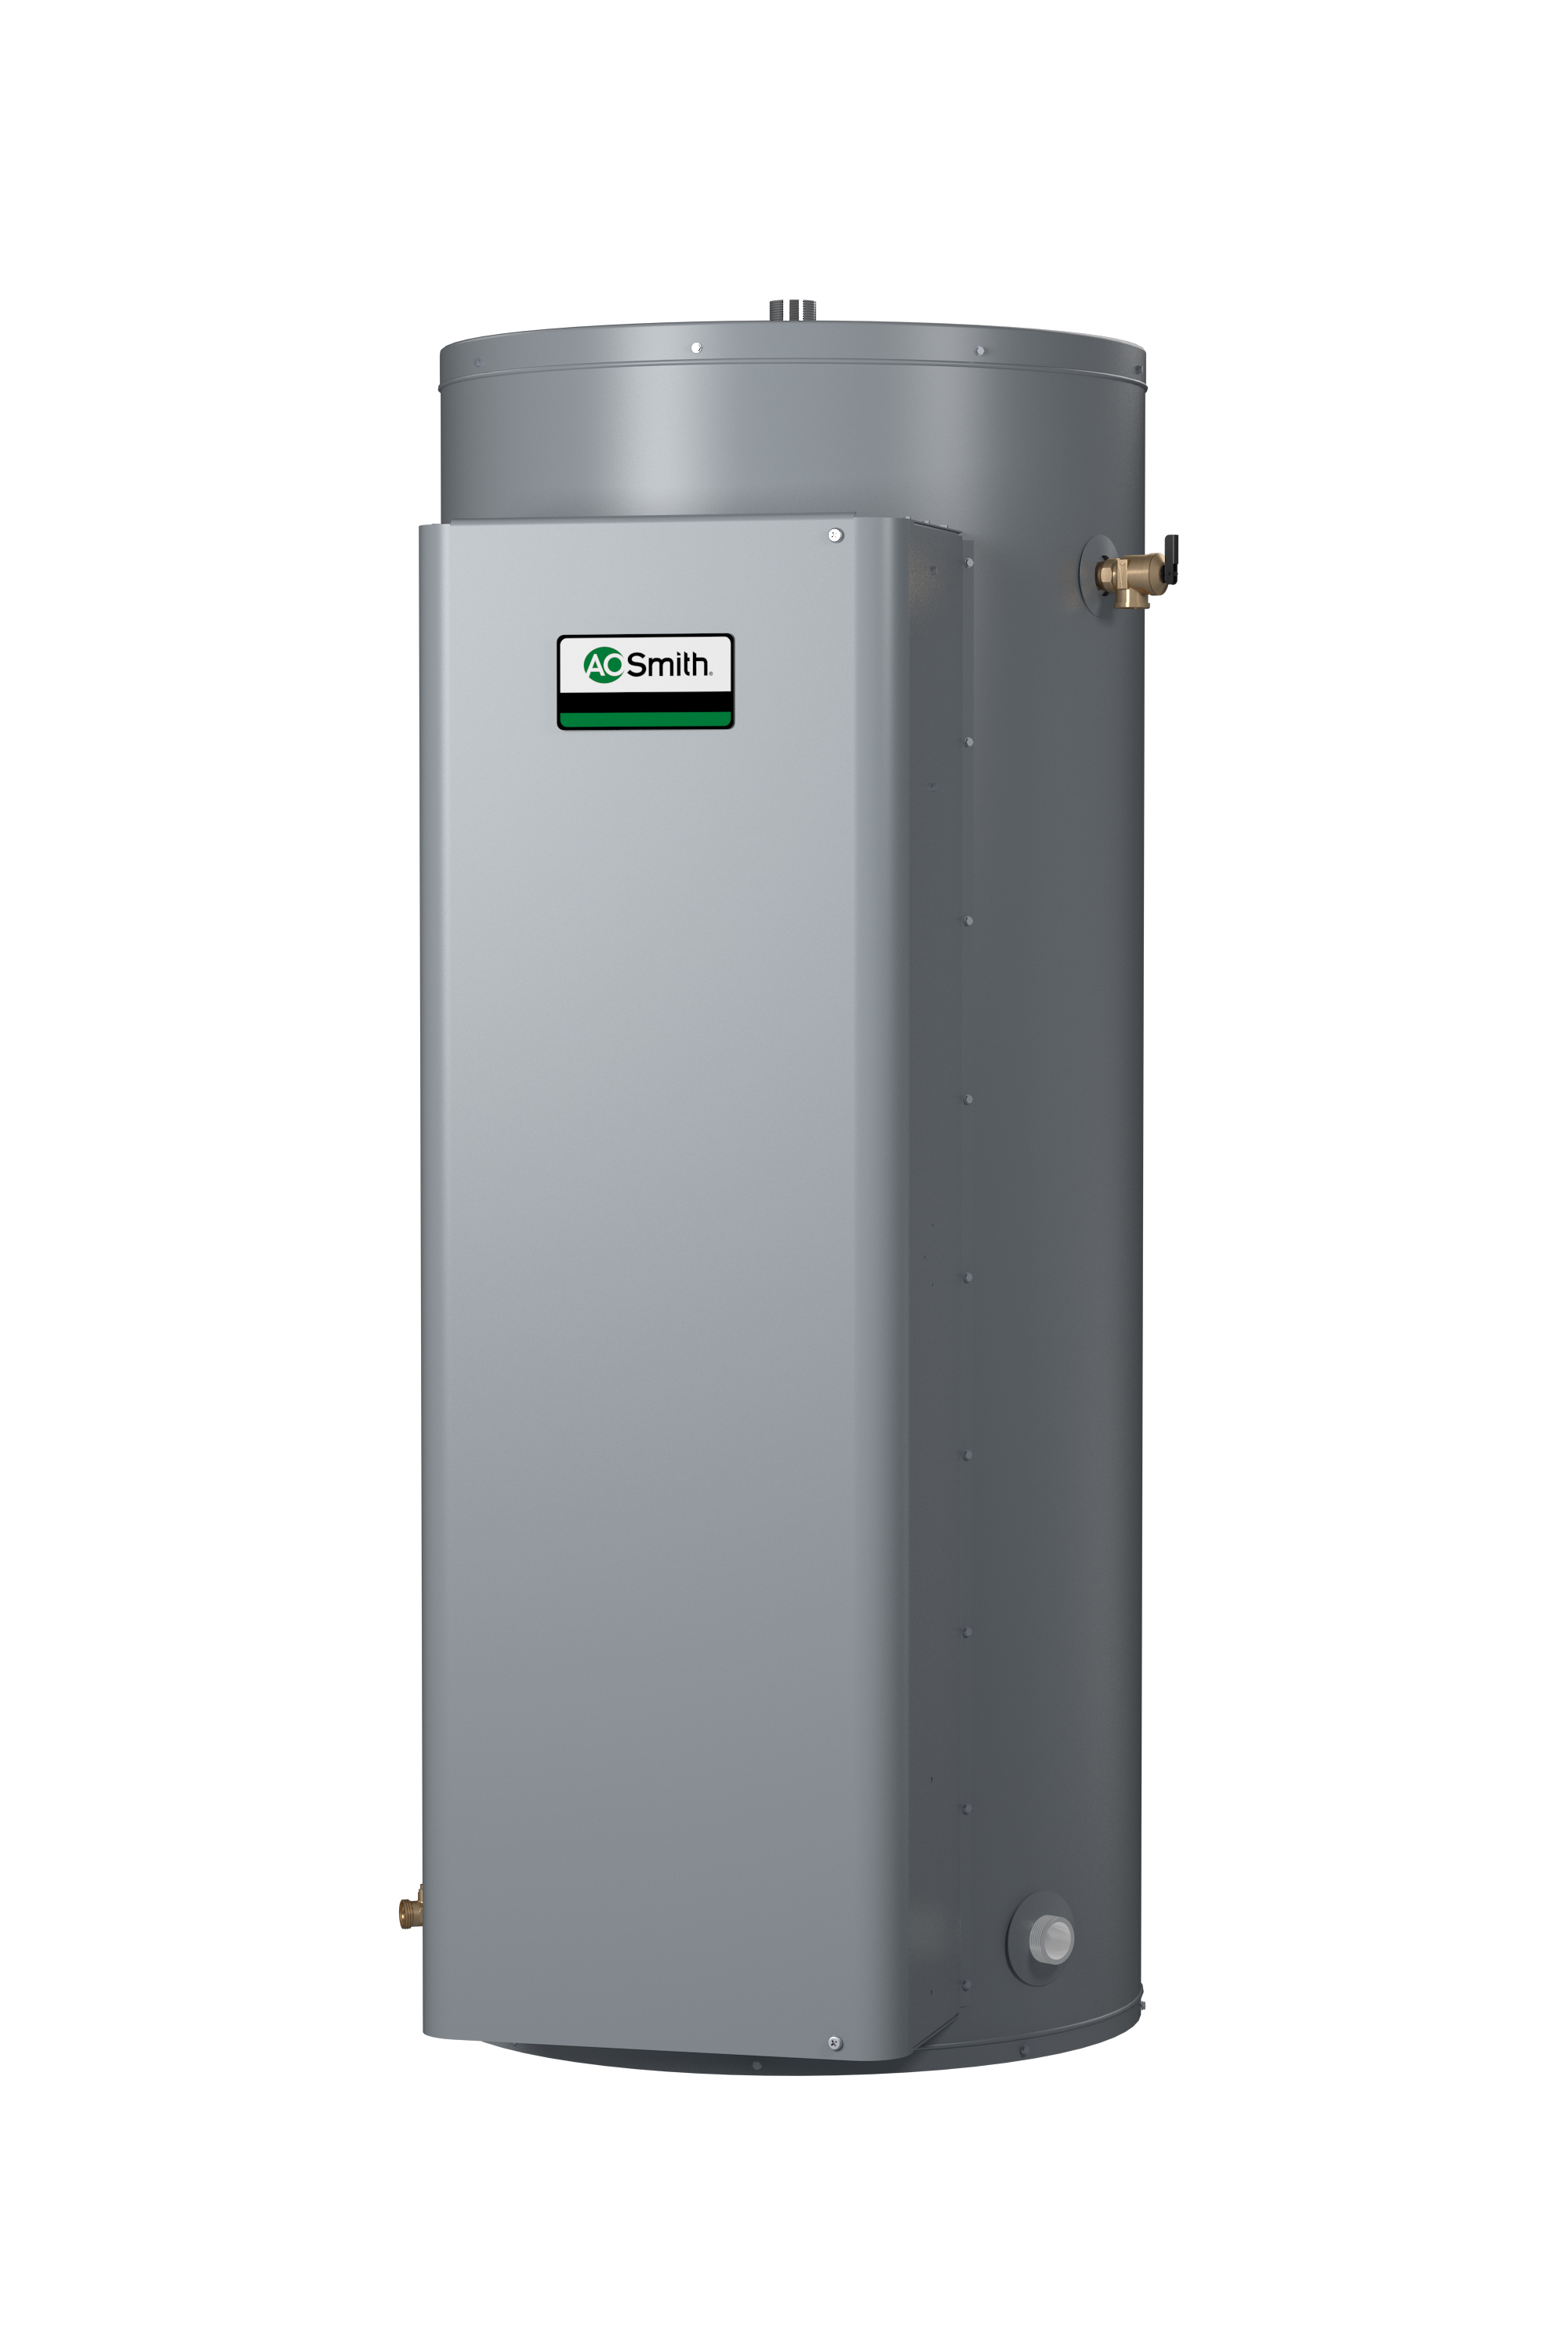 AO SMITH DRE-120A-40.5, 119 GALLON, 40.5KW, 277 VOLT, 144.4 AMPS, 1 PHASE, 9 ELEMENT, ASME COMMERCIAL ELECTRIC WATER HEATER, GOLD SERIES